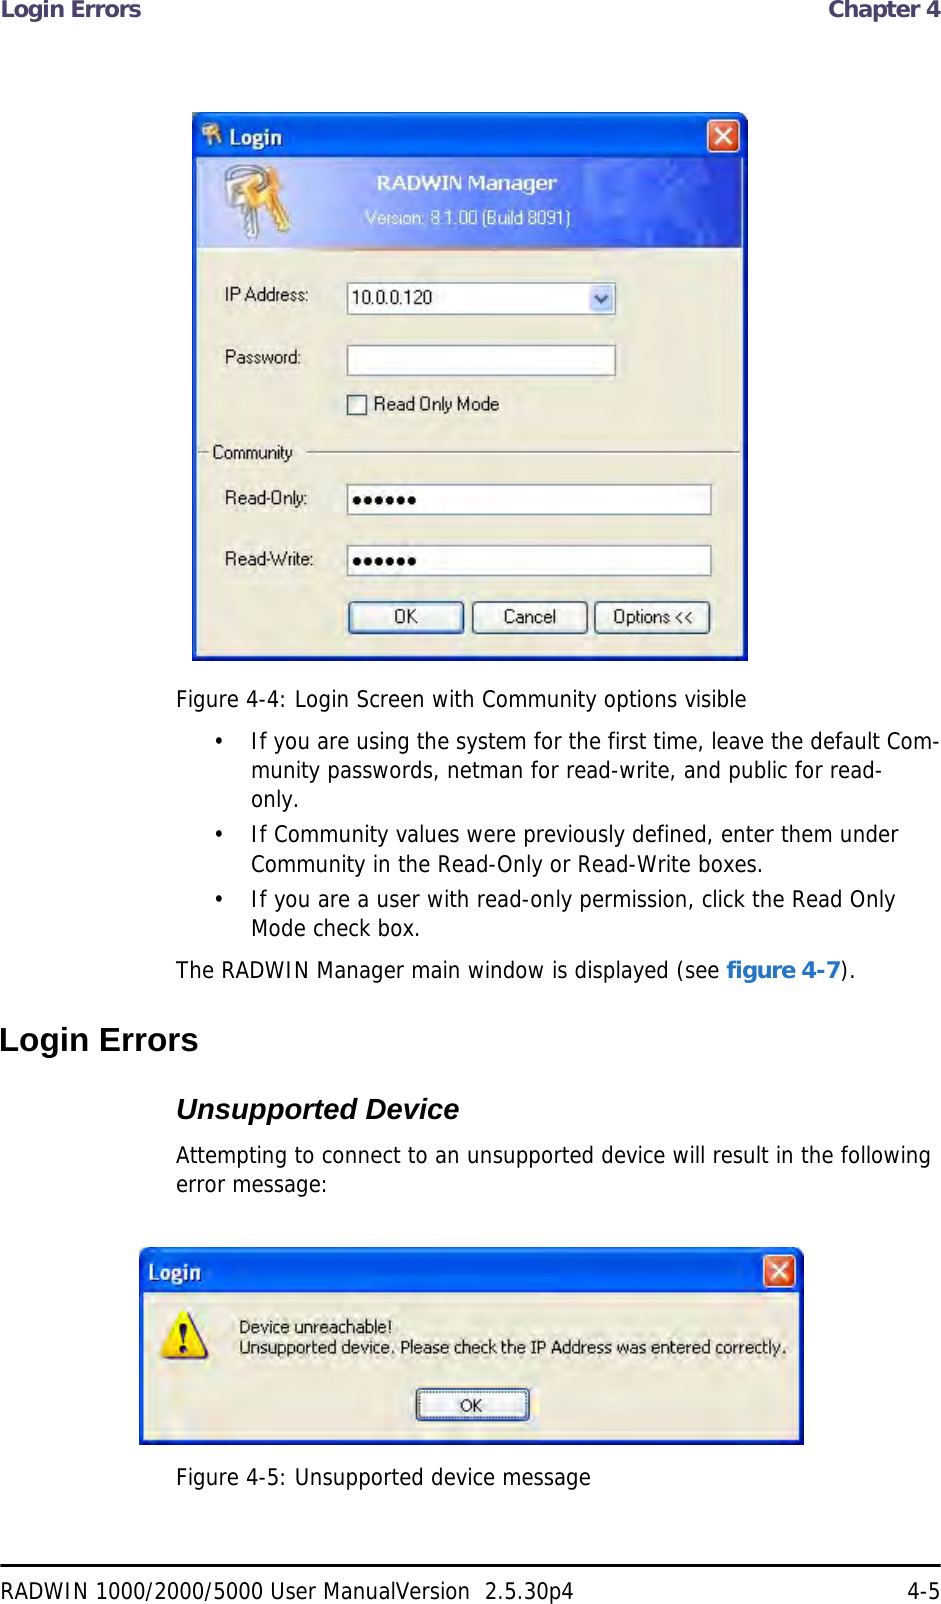 Login Errors  Chapter 4RADWIN 1000/2000/5000 User ManualVersion  2.5.30p4 4-5Figure 4-4: Login Screen with Community options visible• If you are using the system for the first time, leave the default Com-munity passwords, netman for read-write, and public for read-only.• If Community values were previously defined, enter them under Community in the Read-Only or Read-Write boxes.• If you are a user with read-only permission, click the Read Only Mode check box.The RADWIN Manager main window is displayed (see figure 4-7).Login ErrorsUnsupported DeviceAttempting to connect to an unsupported device will result in the following error message:Figure 4-5: Unsupported device message